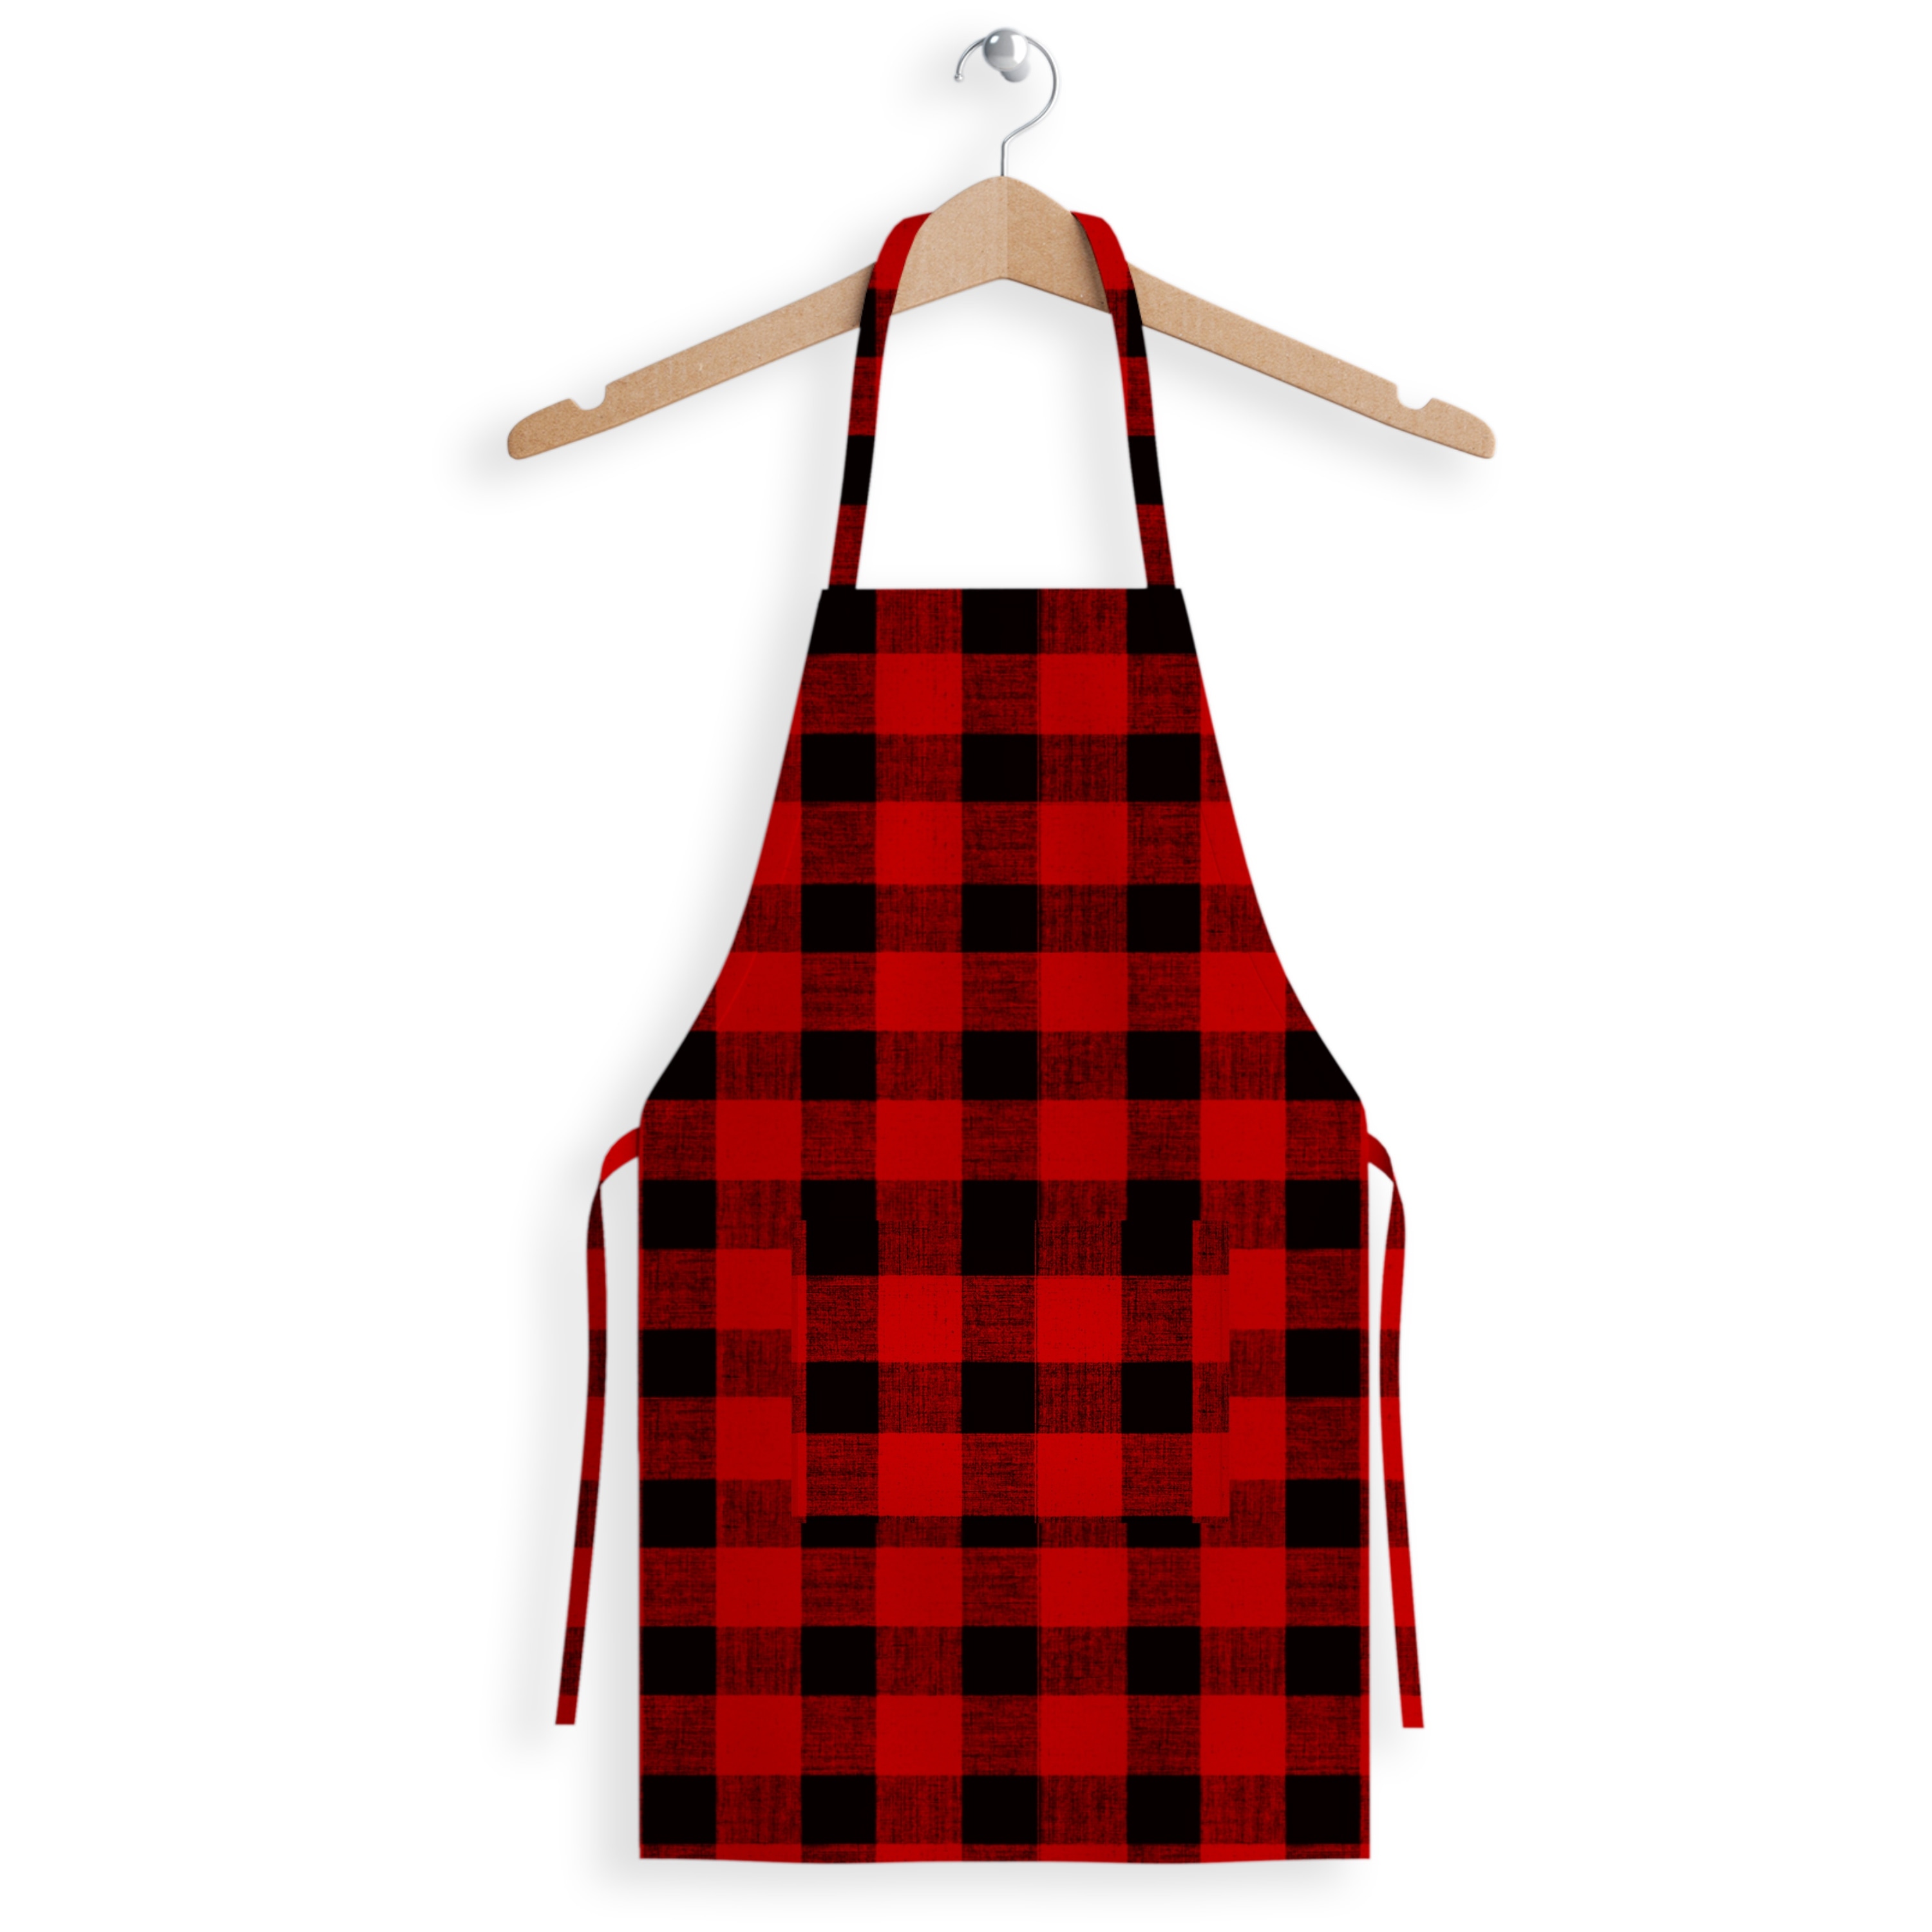 https://ak1.ostkcdn.com/images/products/is/images/direct/30264d9b7b5c56681a4d8f27d80c0ebade0e497c/Fabstyles-Buffalo-Check-Cotton-Apron.jpg